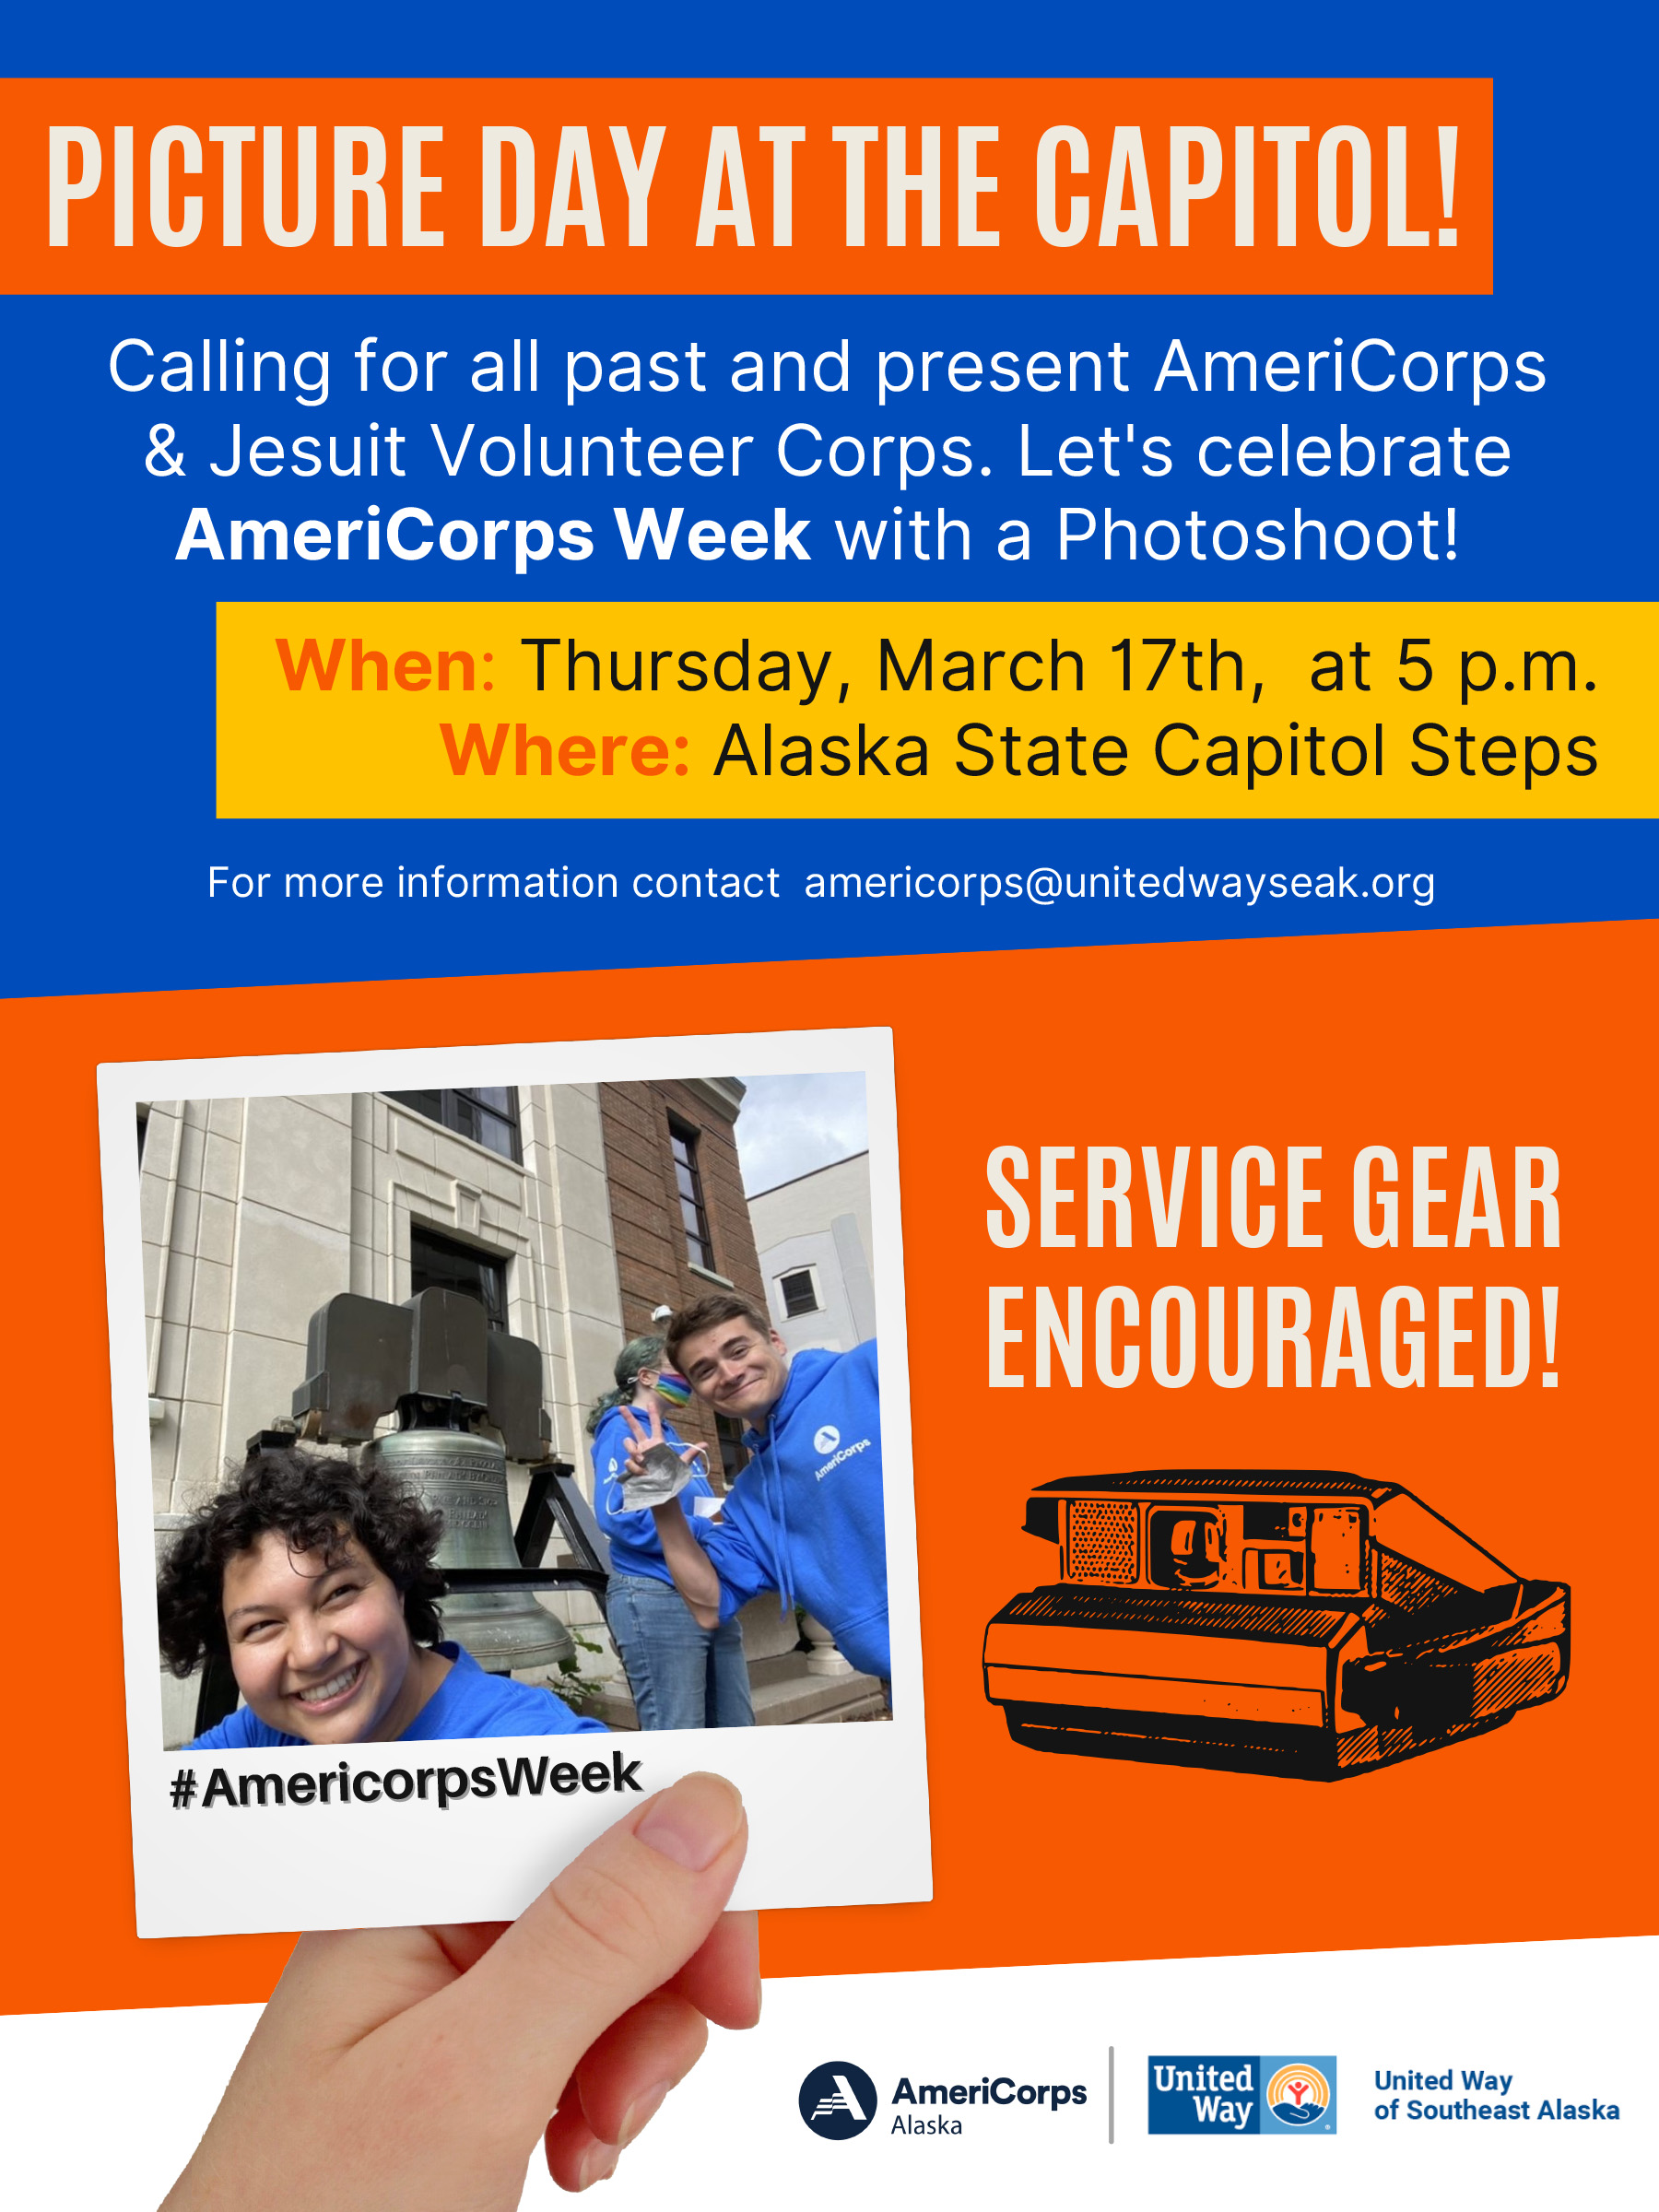 Celebrate AmeriCorps Week with a Photoshoot